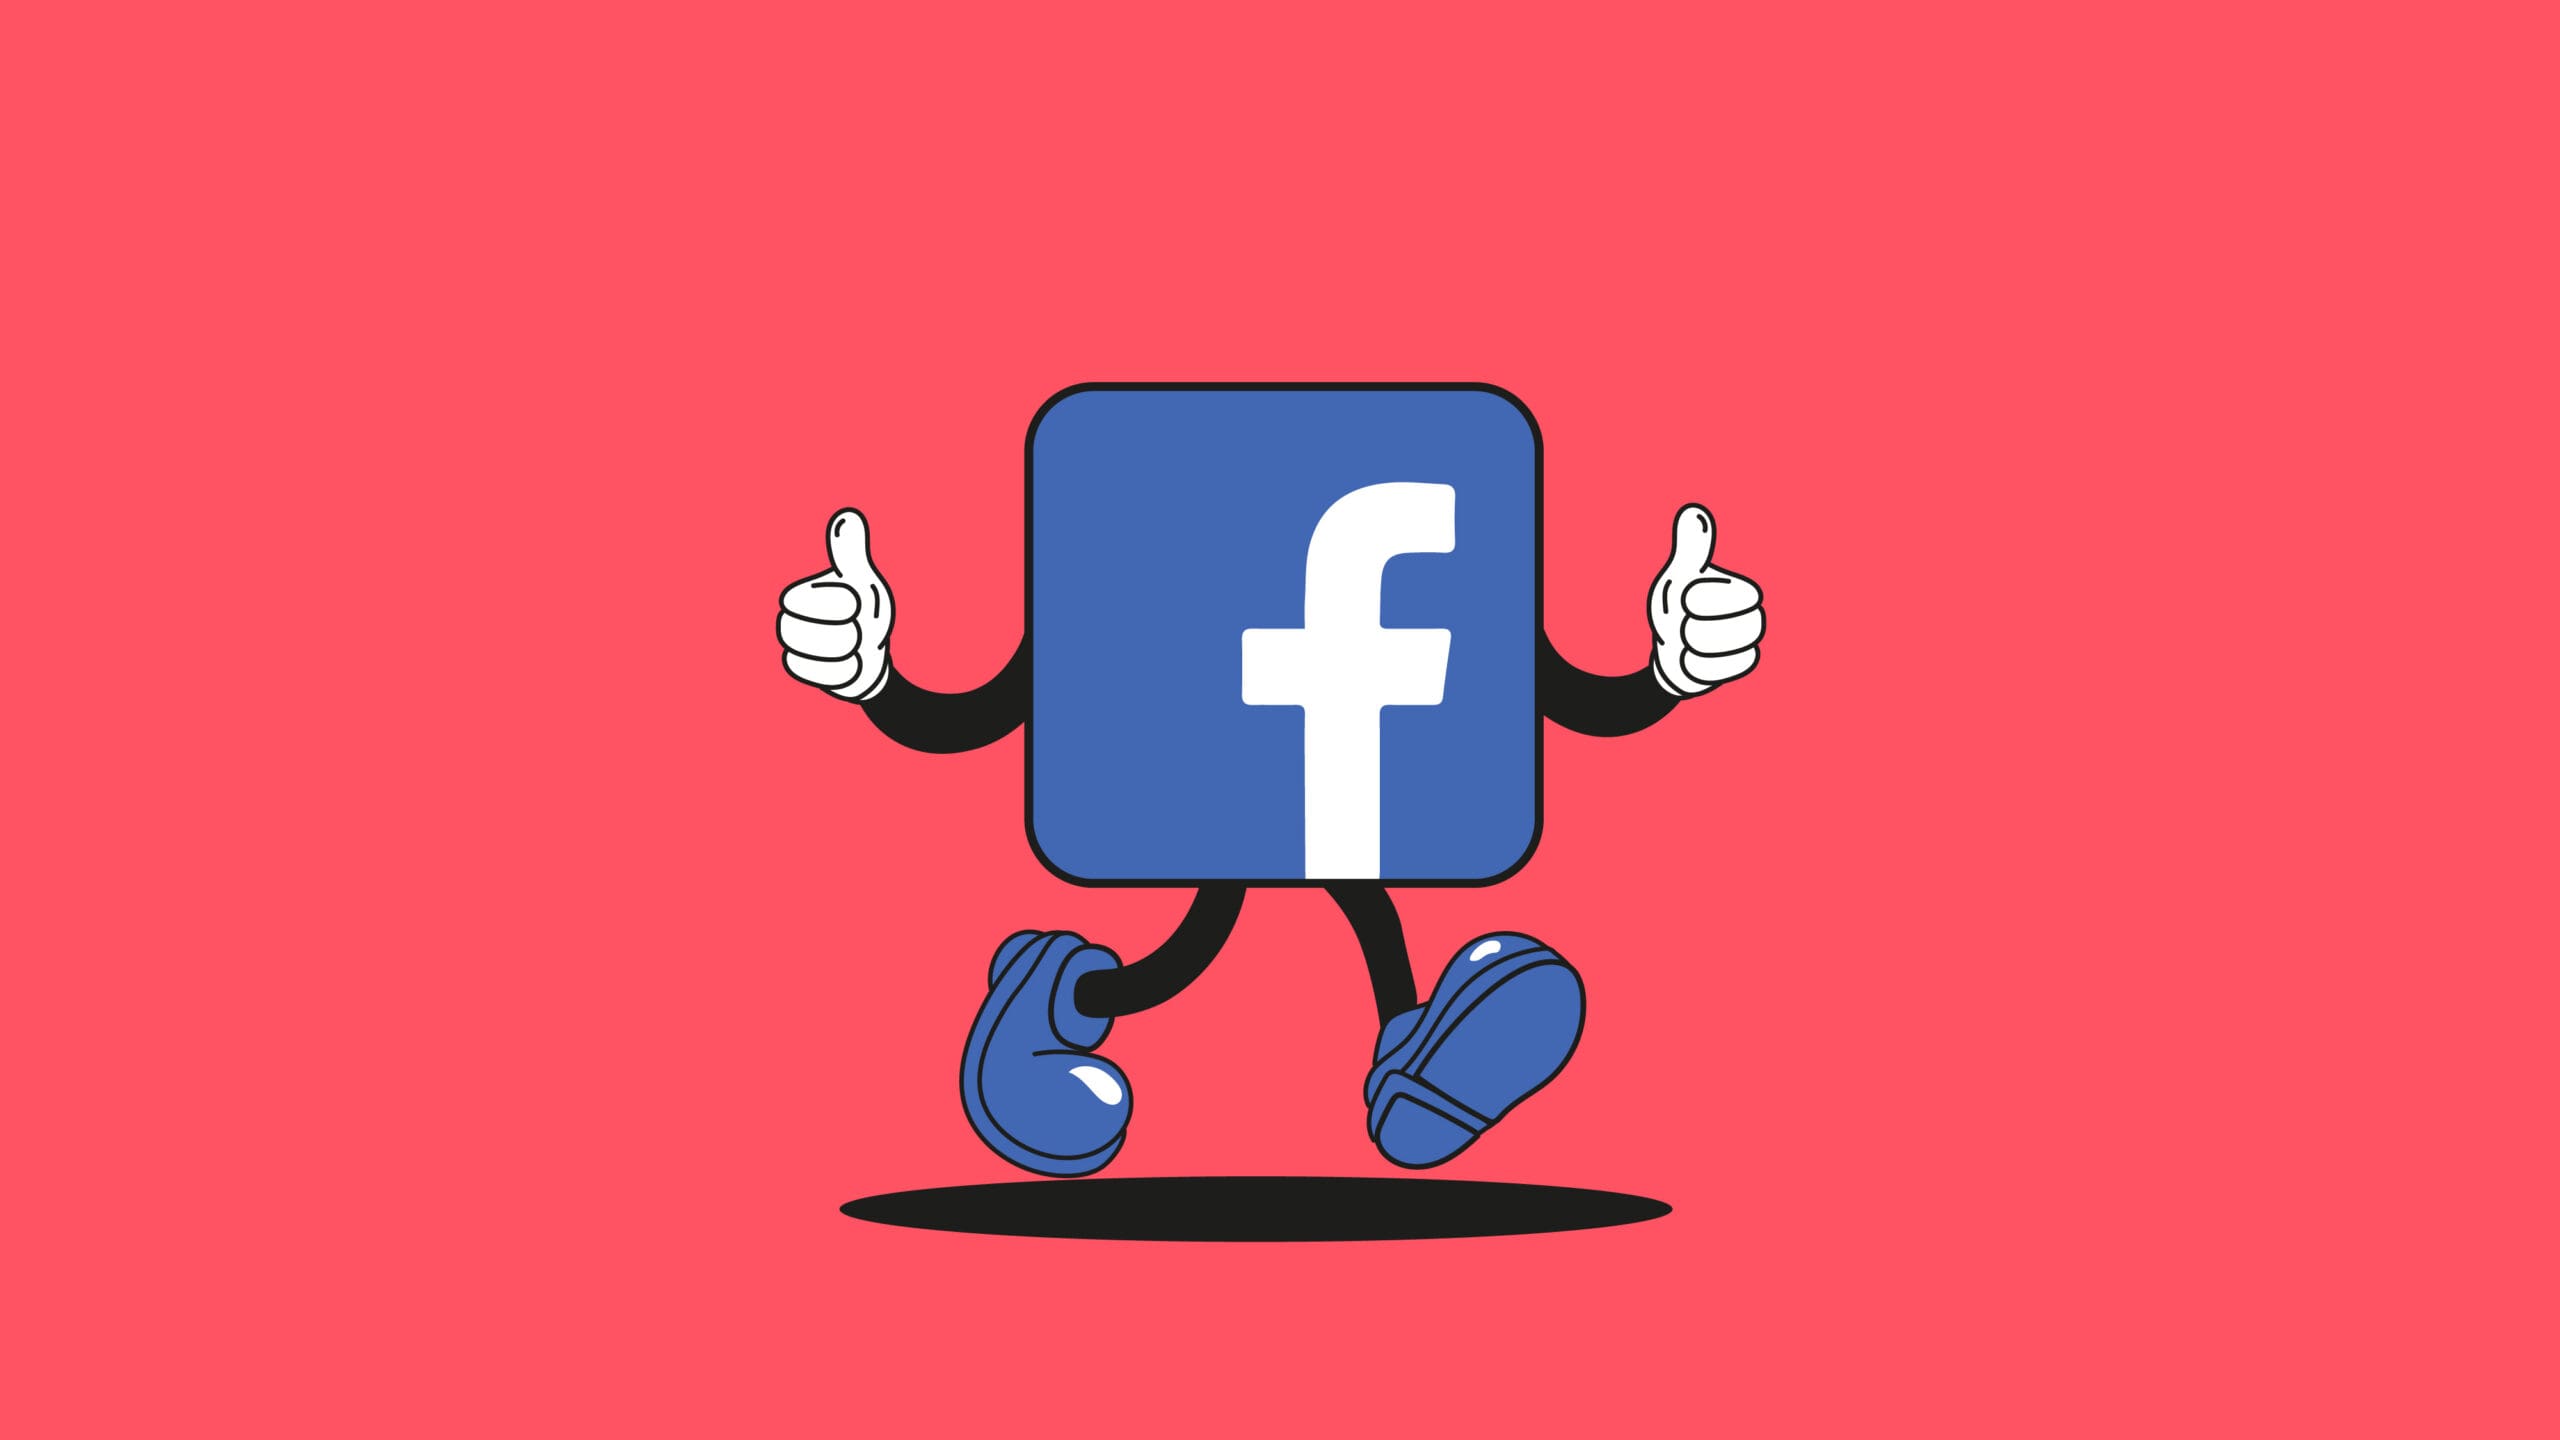 Image of Facebook Icon with hands and legs walking and thumbs up.